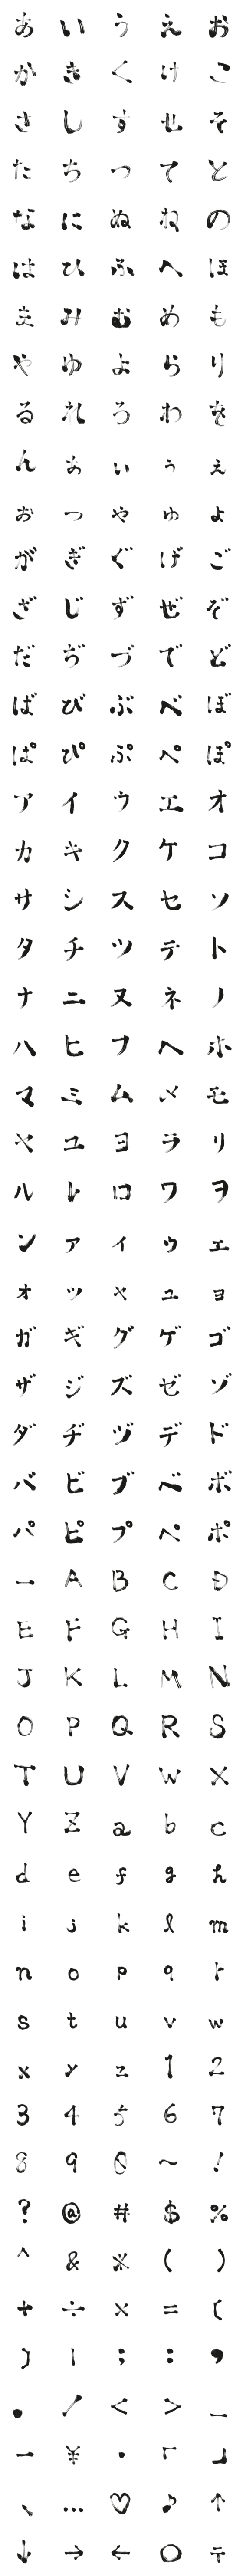 [LINE絵文字]Calligraphy style font2の画像一覧